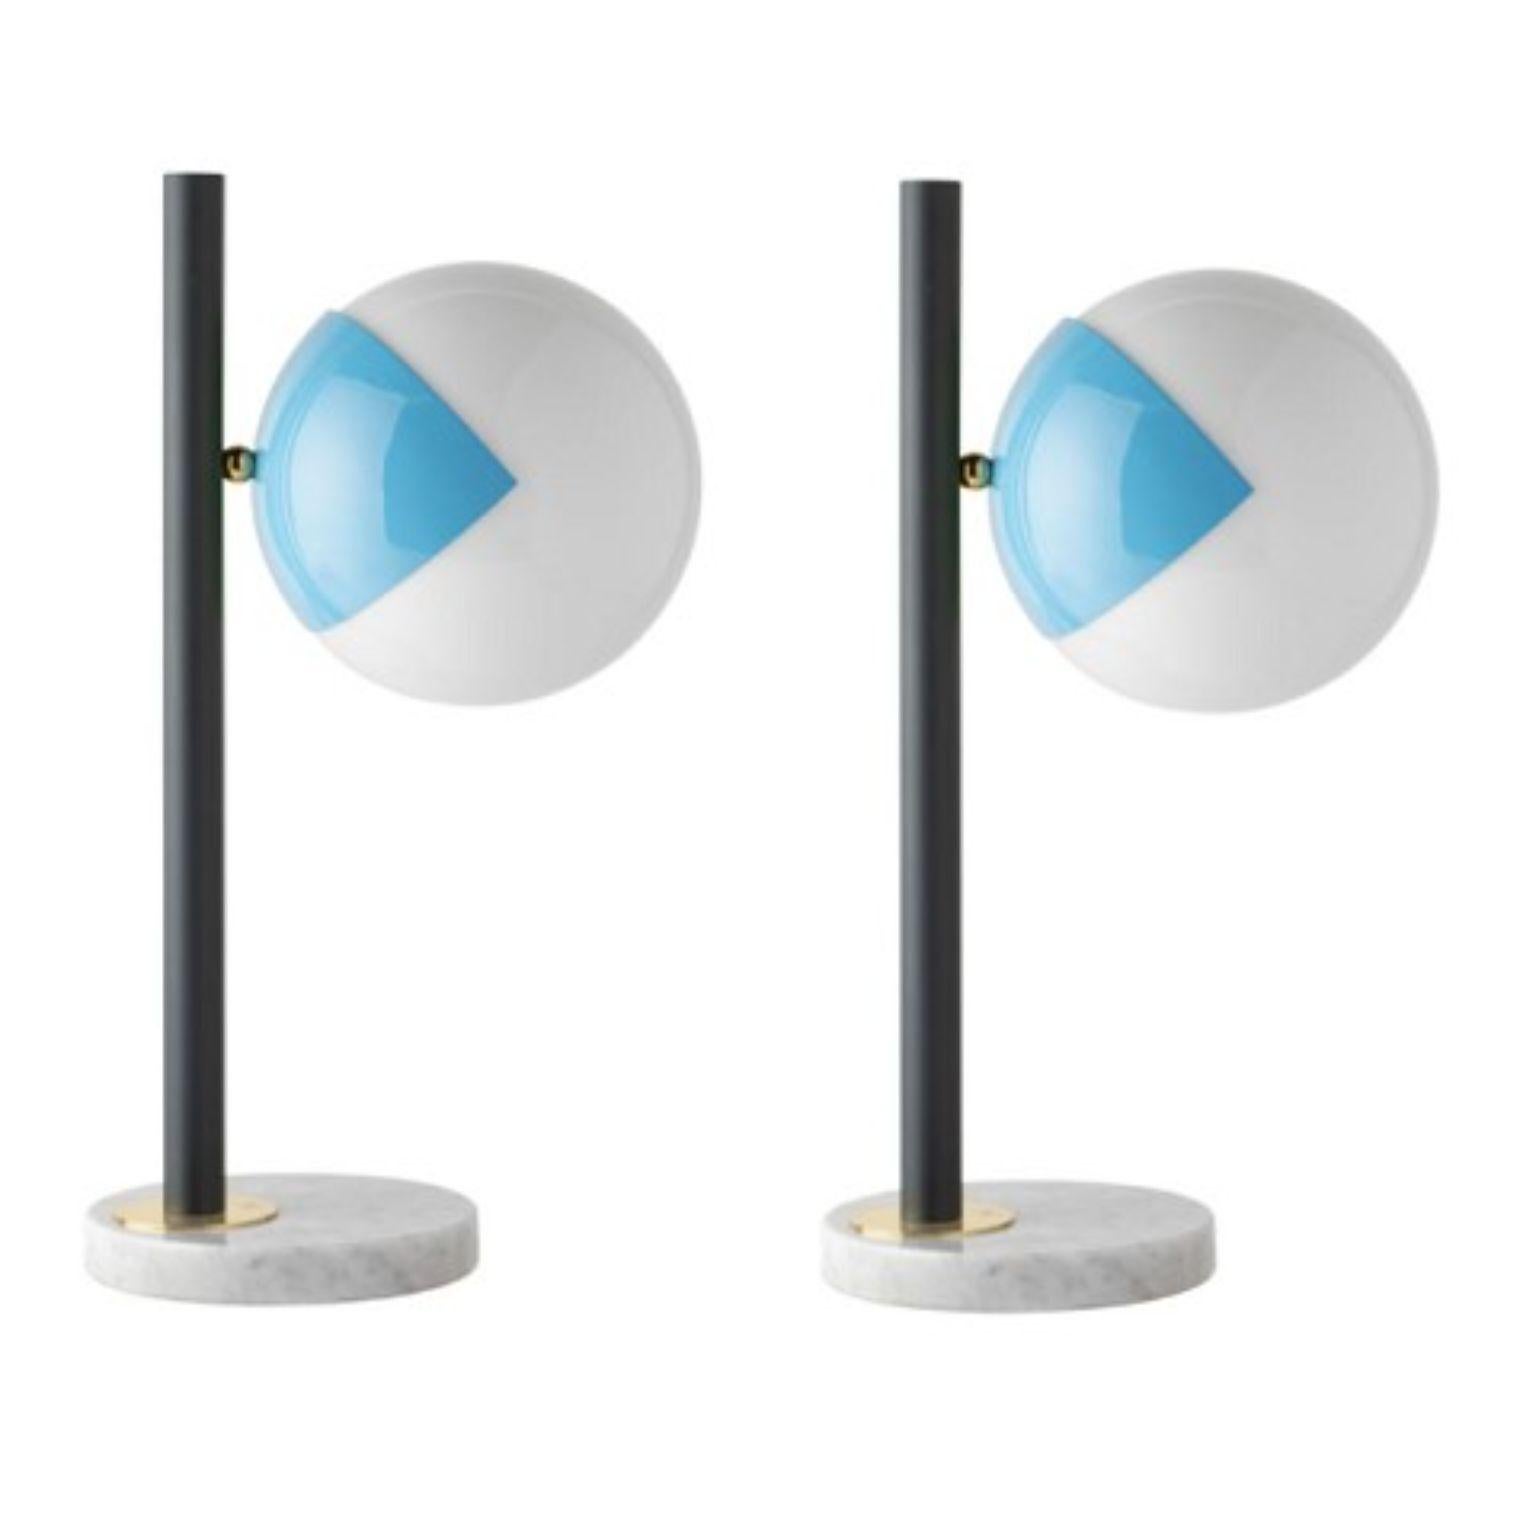 Dimmable table lamp pop-up black by Magic Circus Editions
Dimensions: Ø 22 x 30 x 53 cm 
Materials: Carrara marble base, smooth brass tube, glossy mouth blown glass

All our lamps can be wired according to each country. If sold to the USA it